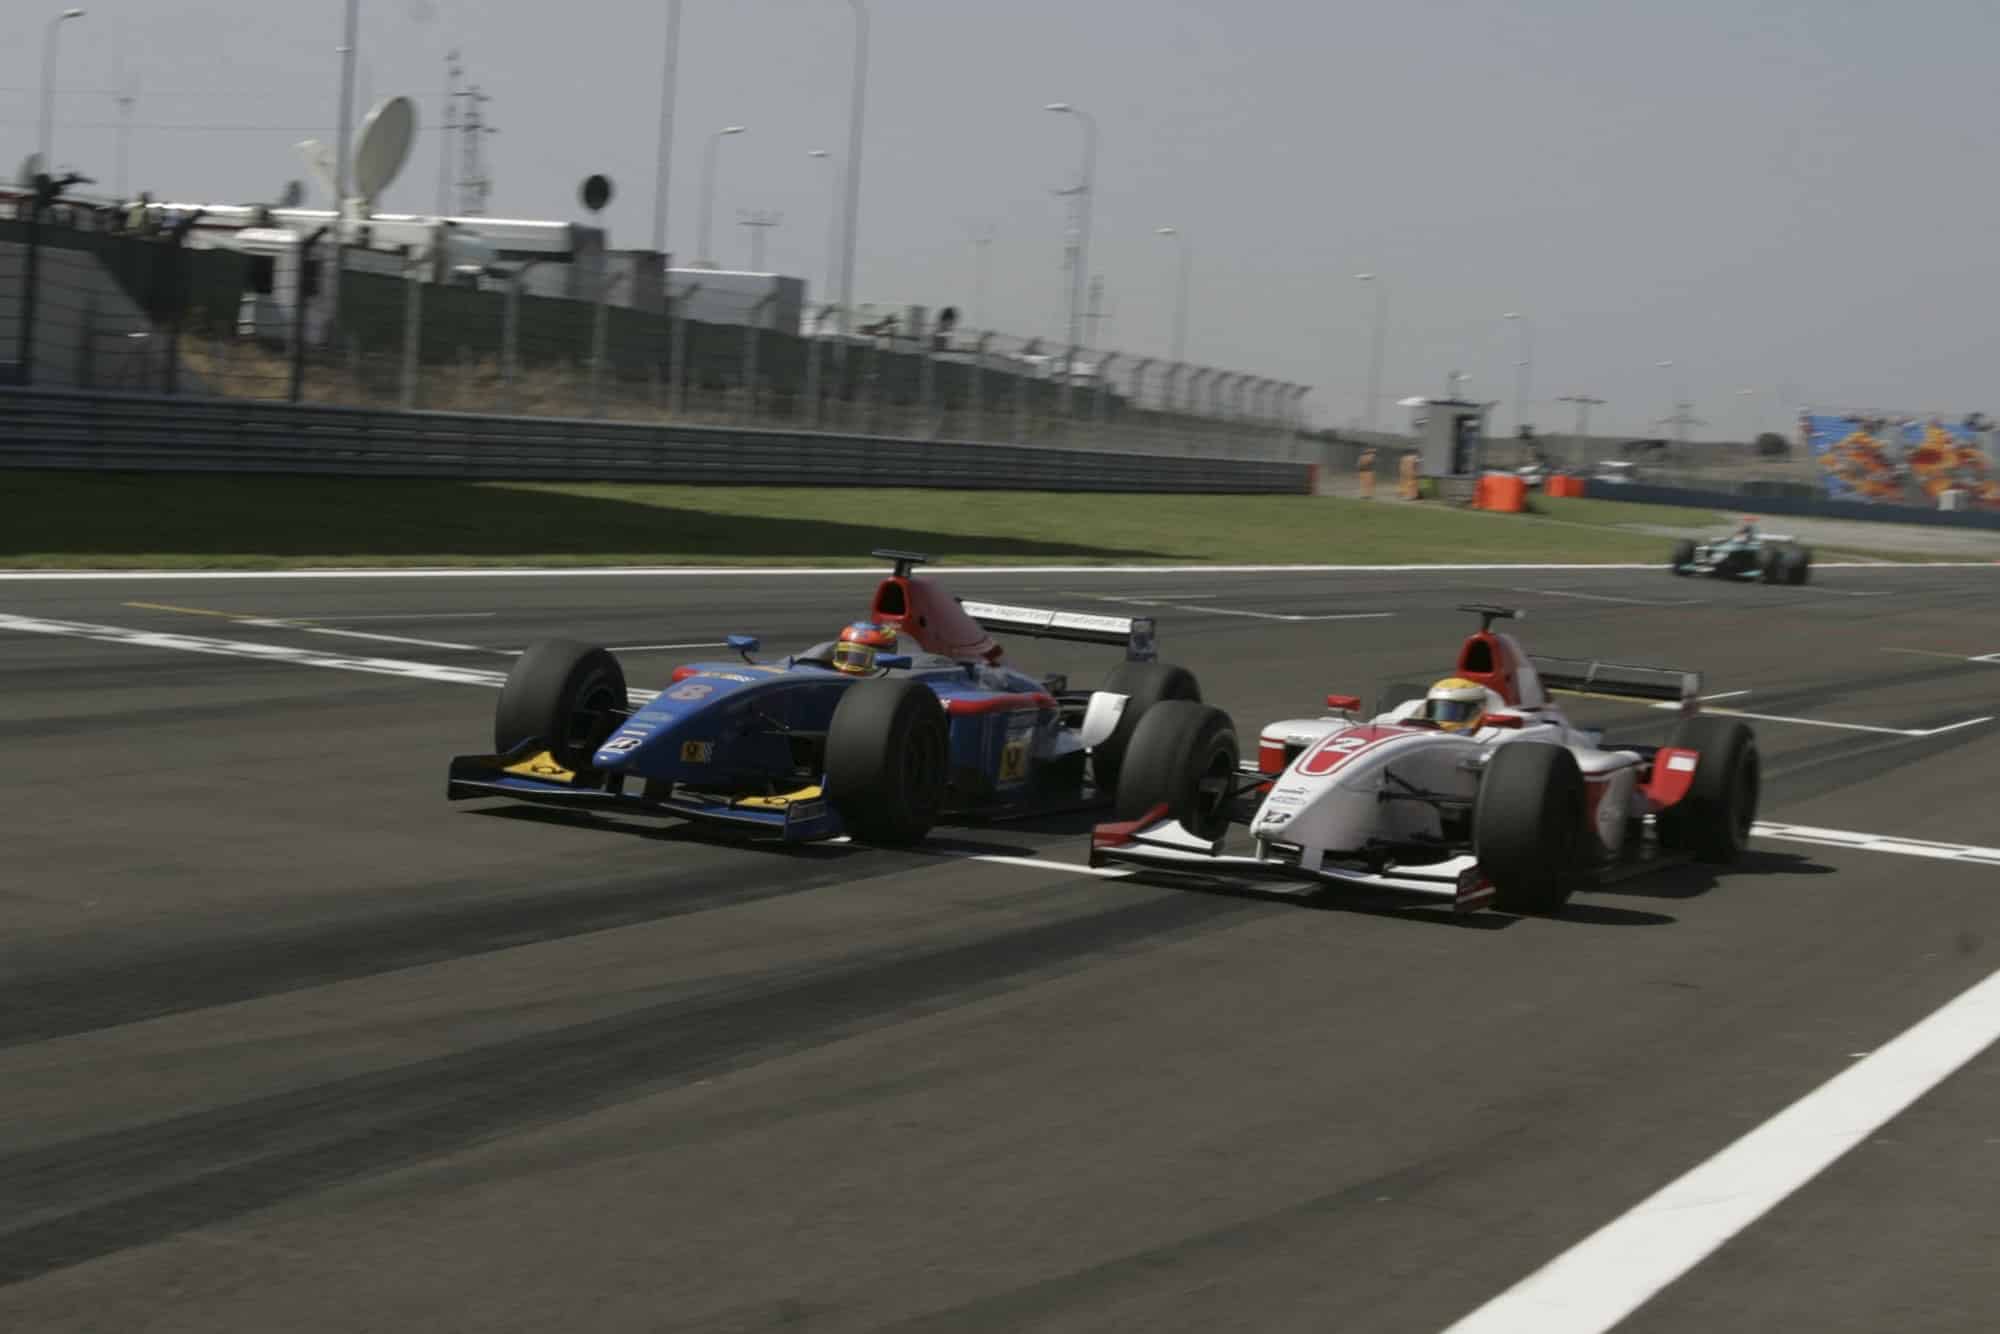 Lewis Hamilton and Timo Glock battle side by side at the 2006 GP2 race in Istanbul